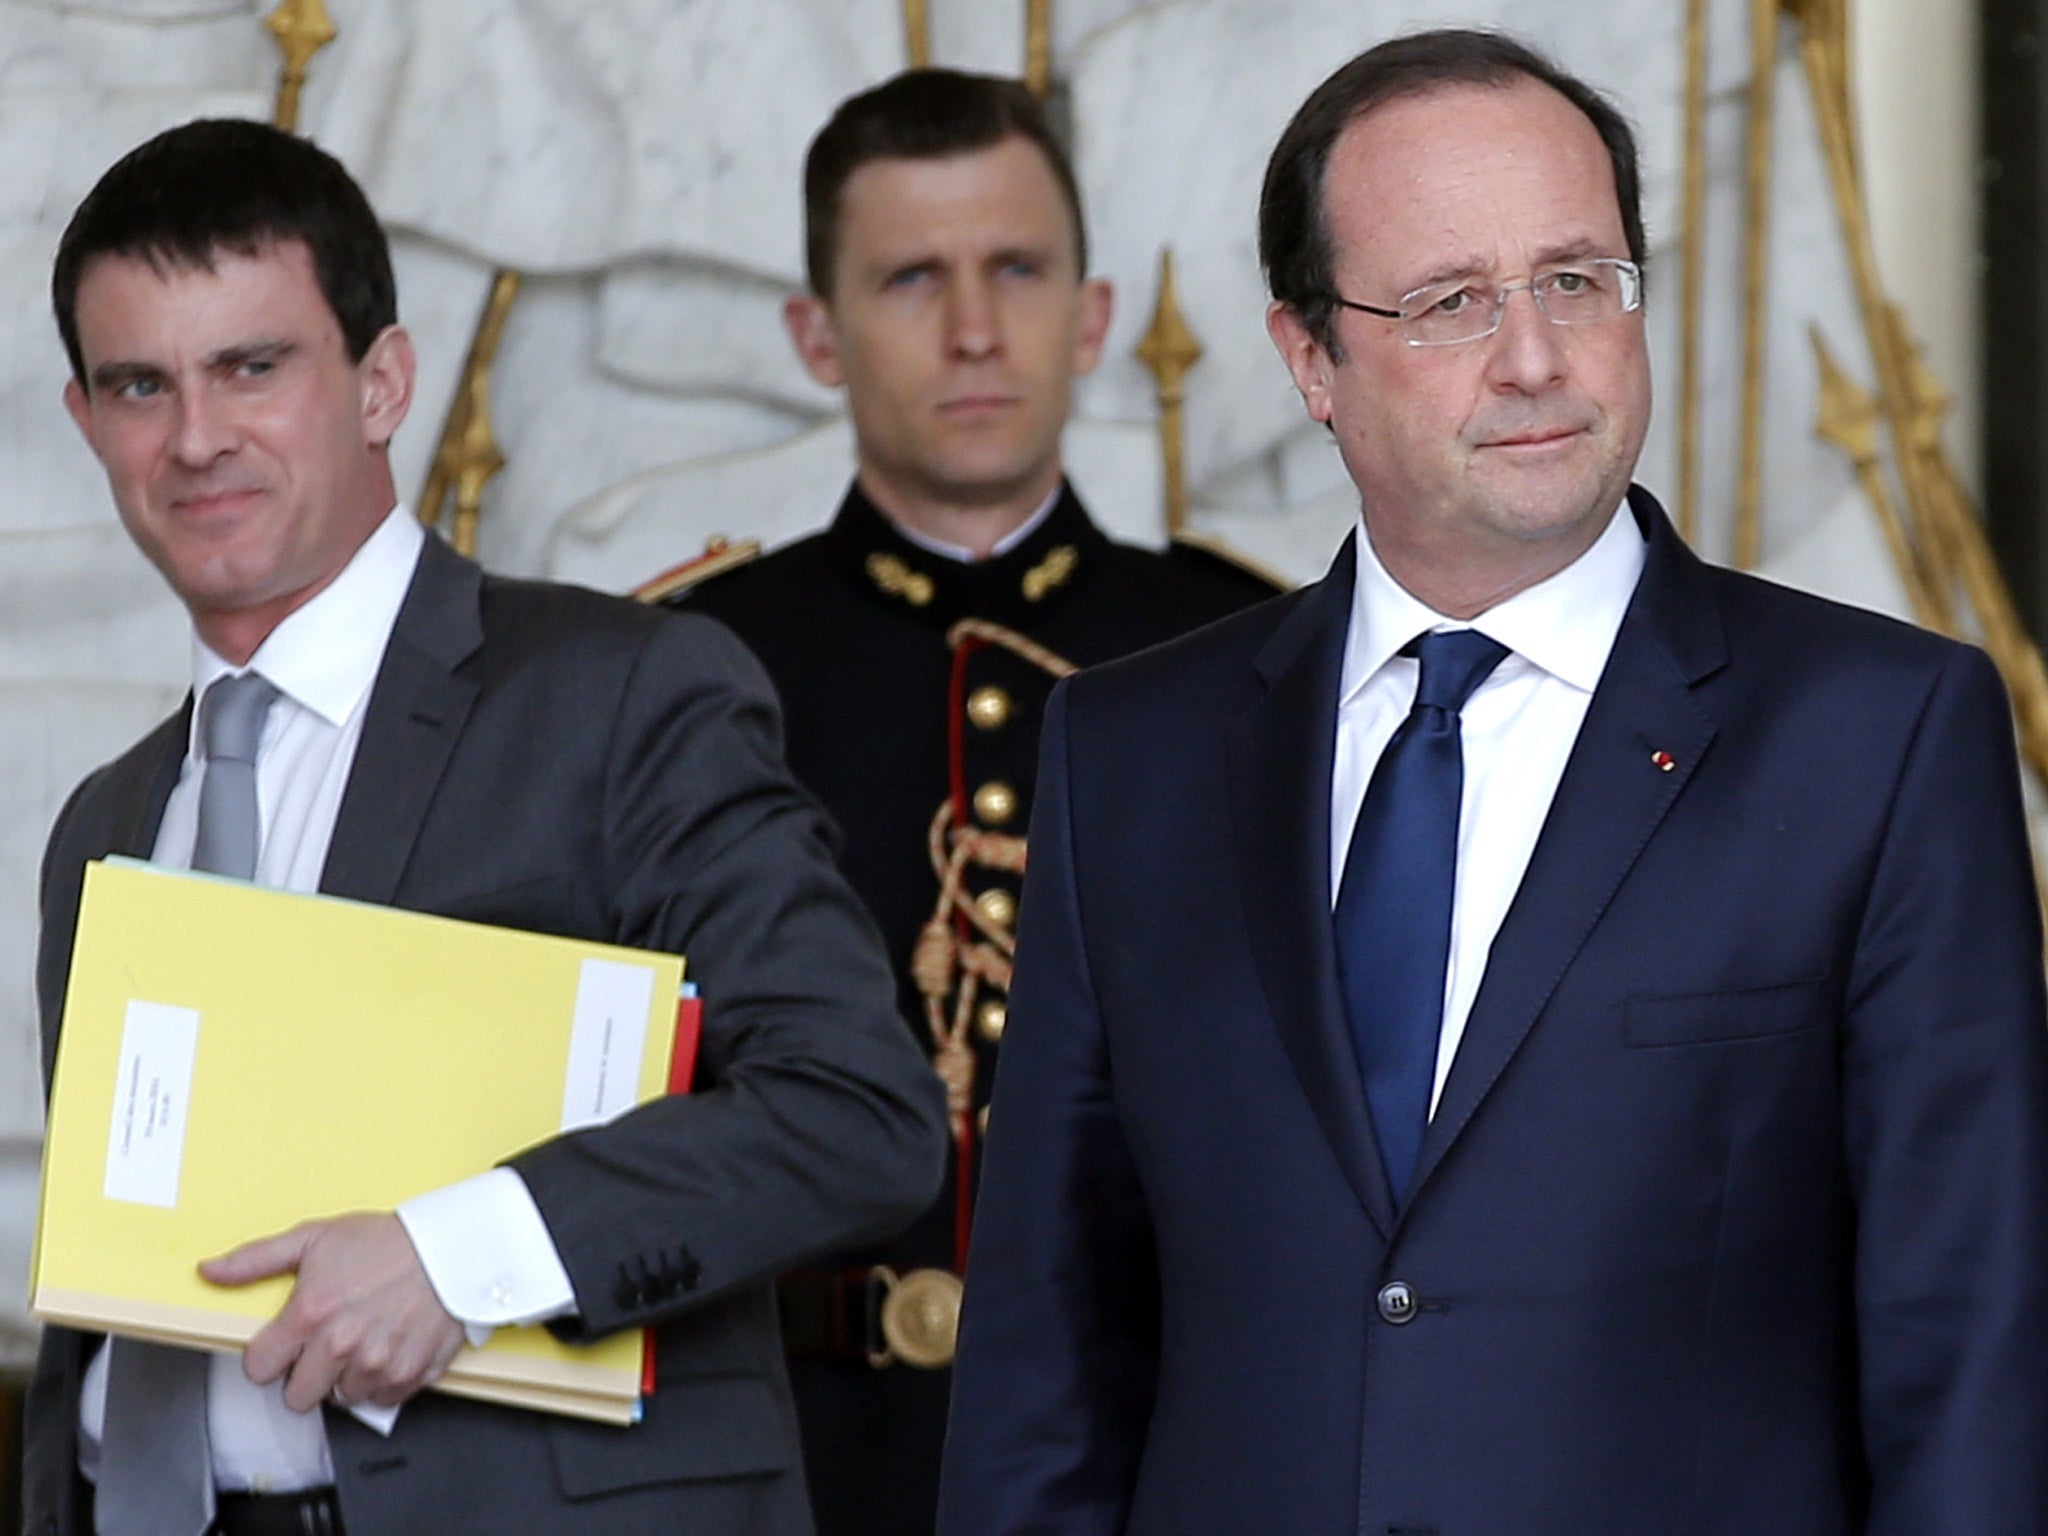 Manuel Valls, left, was appointed by Hollande to the position of Prime Minister